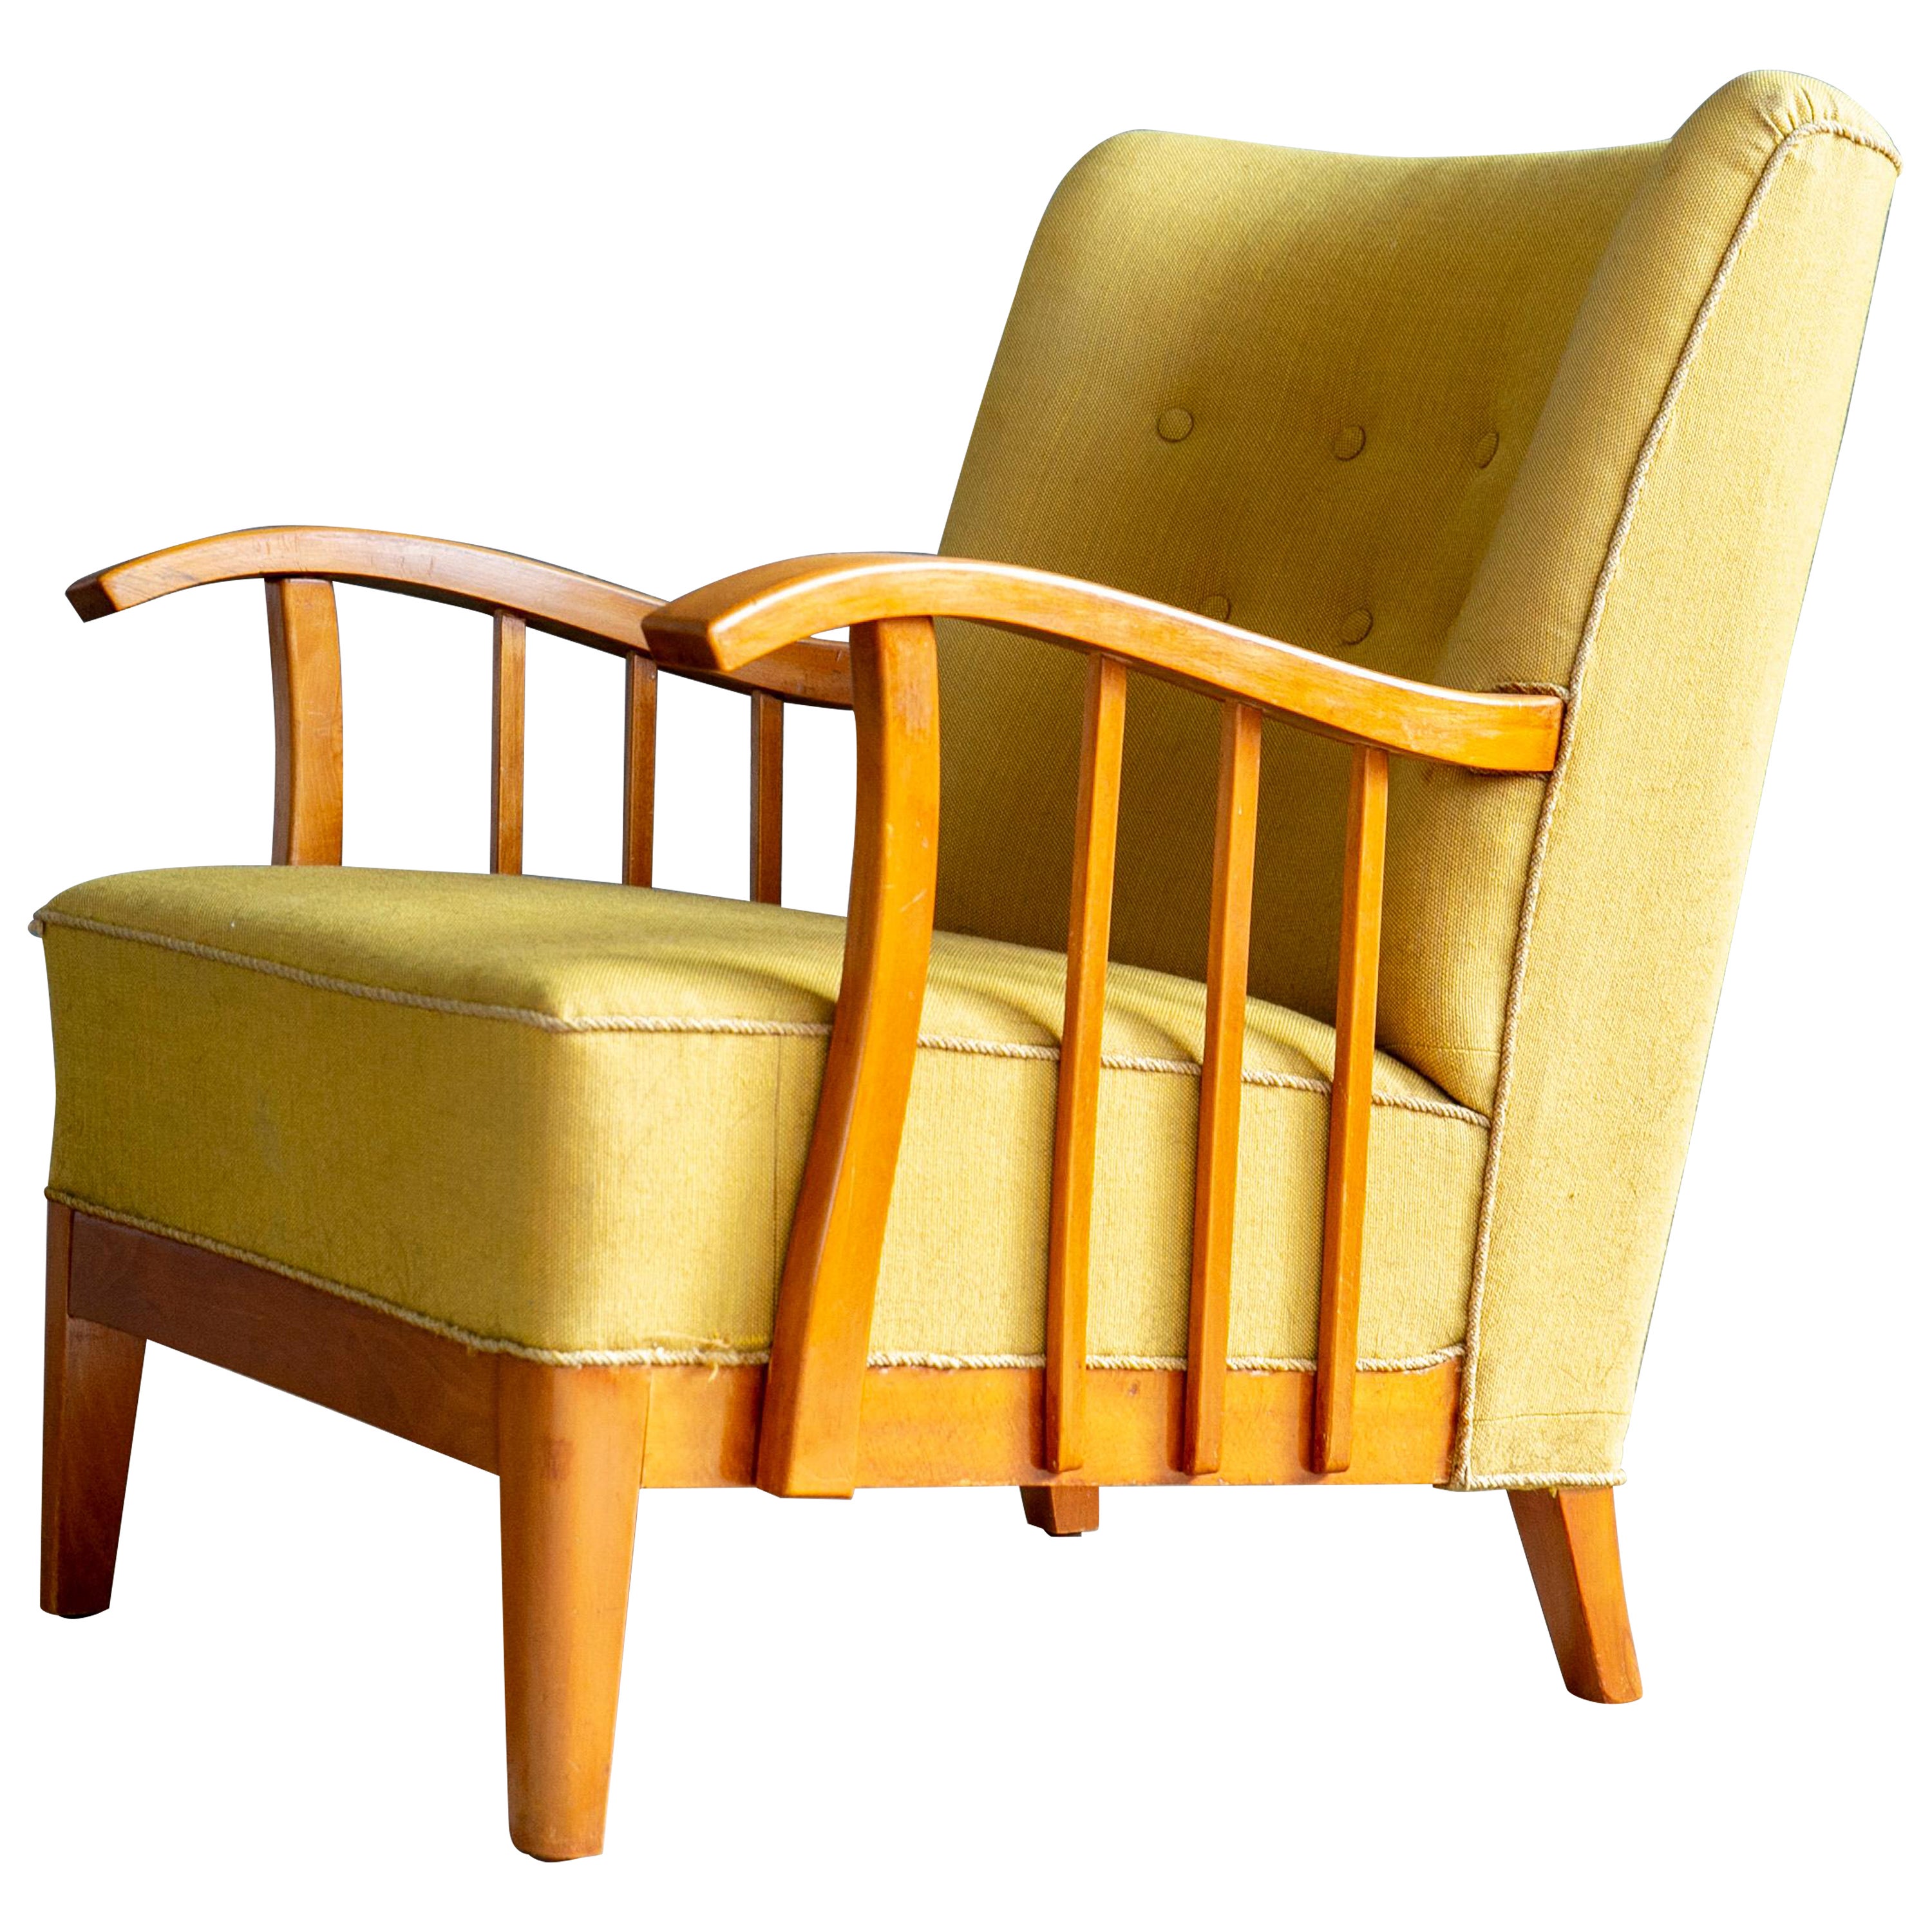 Danish 1940s Lounge Chairs with Elmwood Armrests For Sale